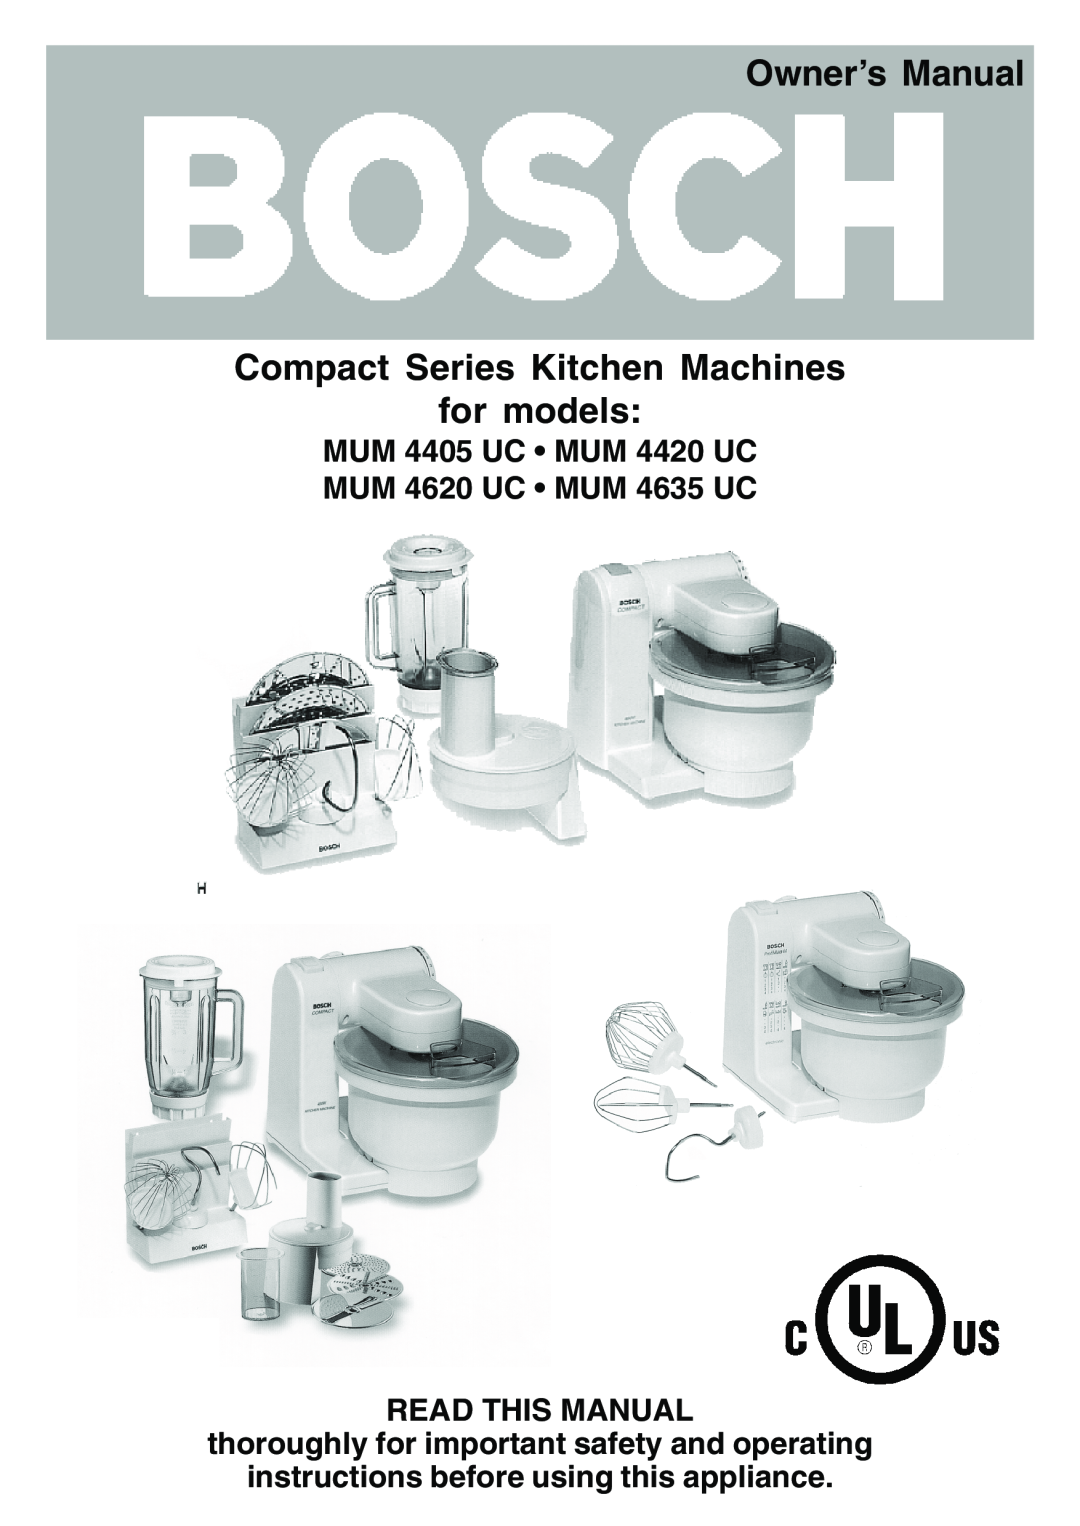 Bosch Appliances MUM 4620 UC, MUM 4635 UC owner manual Owner’s Manual Compact Series Kitchen Machines for models 